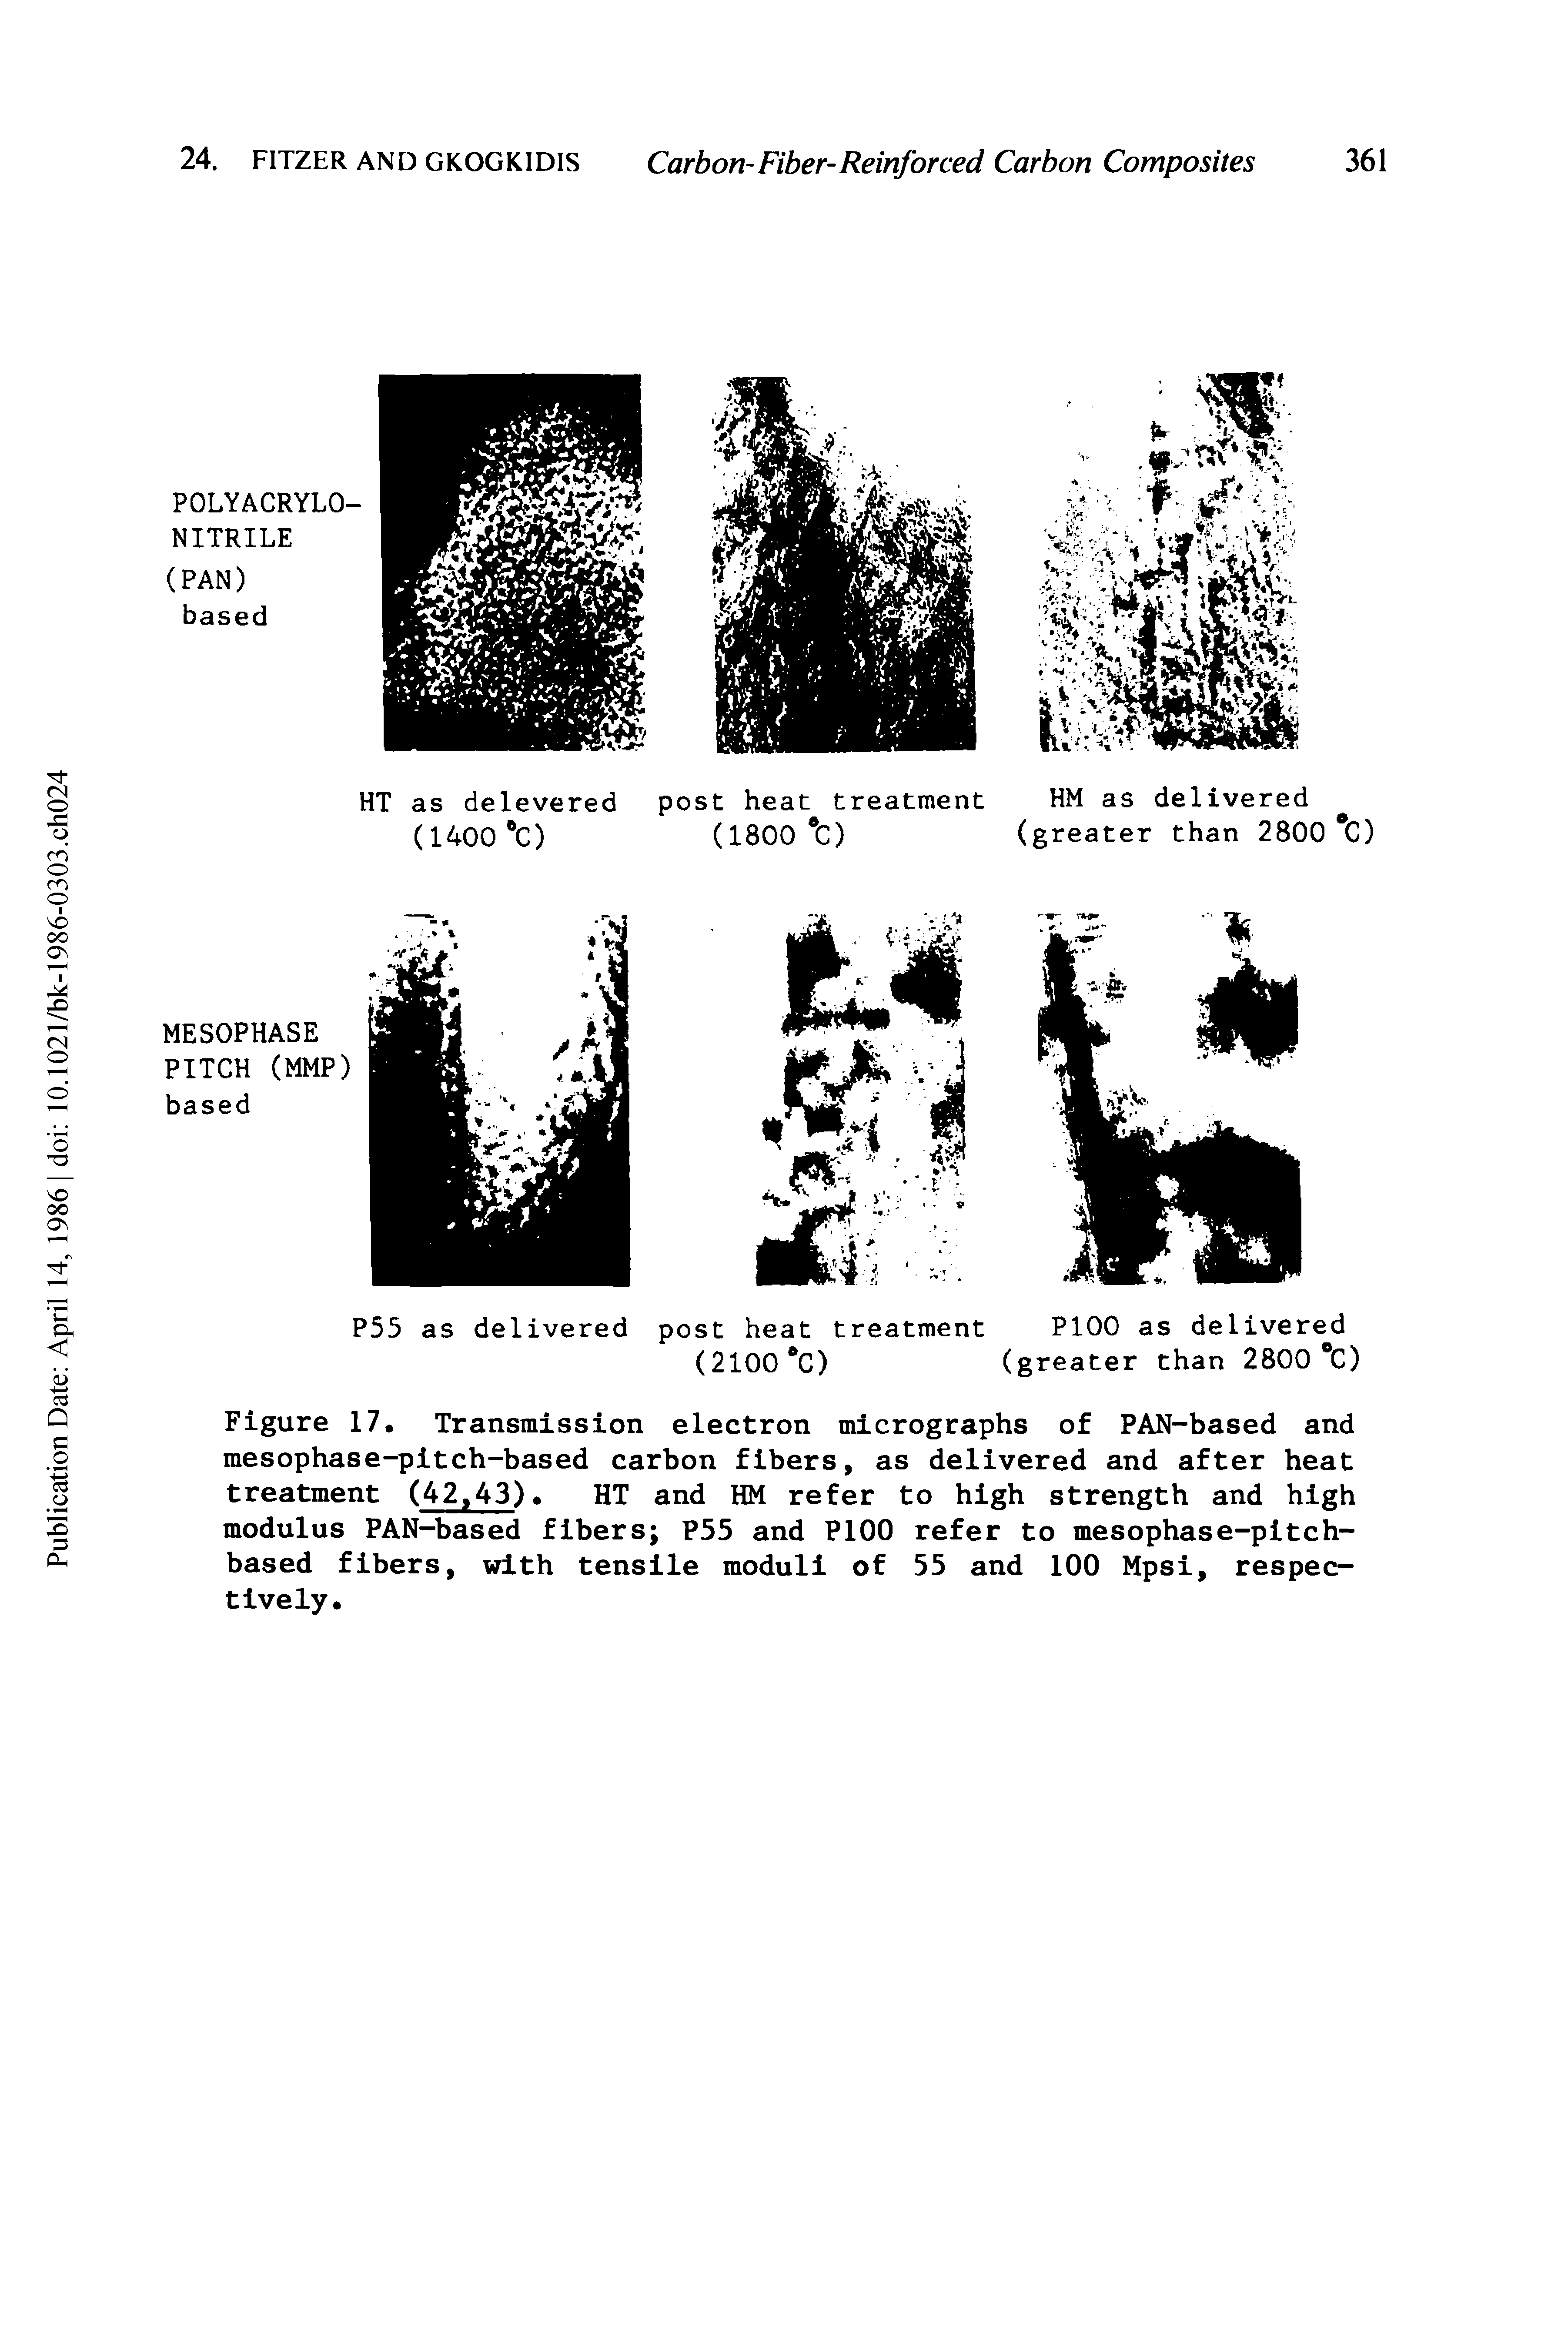 Figure 17. Transmission electron micrographs of PAN-based and mesophase-pitch-based carbon fibers, as delivered and after heat treatment (42,43). HT and HM refer to high strength and high modulus PAN-based fibers P55 and P100 refer to mesophase-pitch-based fibers, with tensile moduli of 55 and 100 Mpsi, respectively.